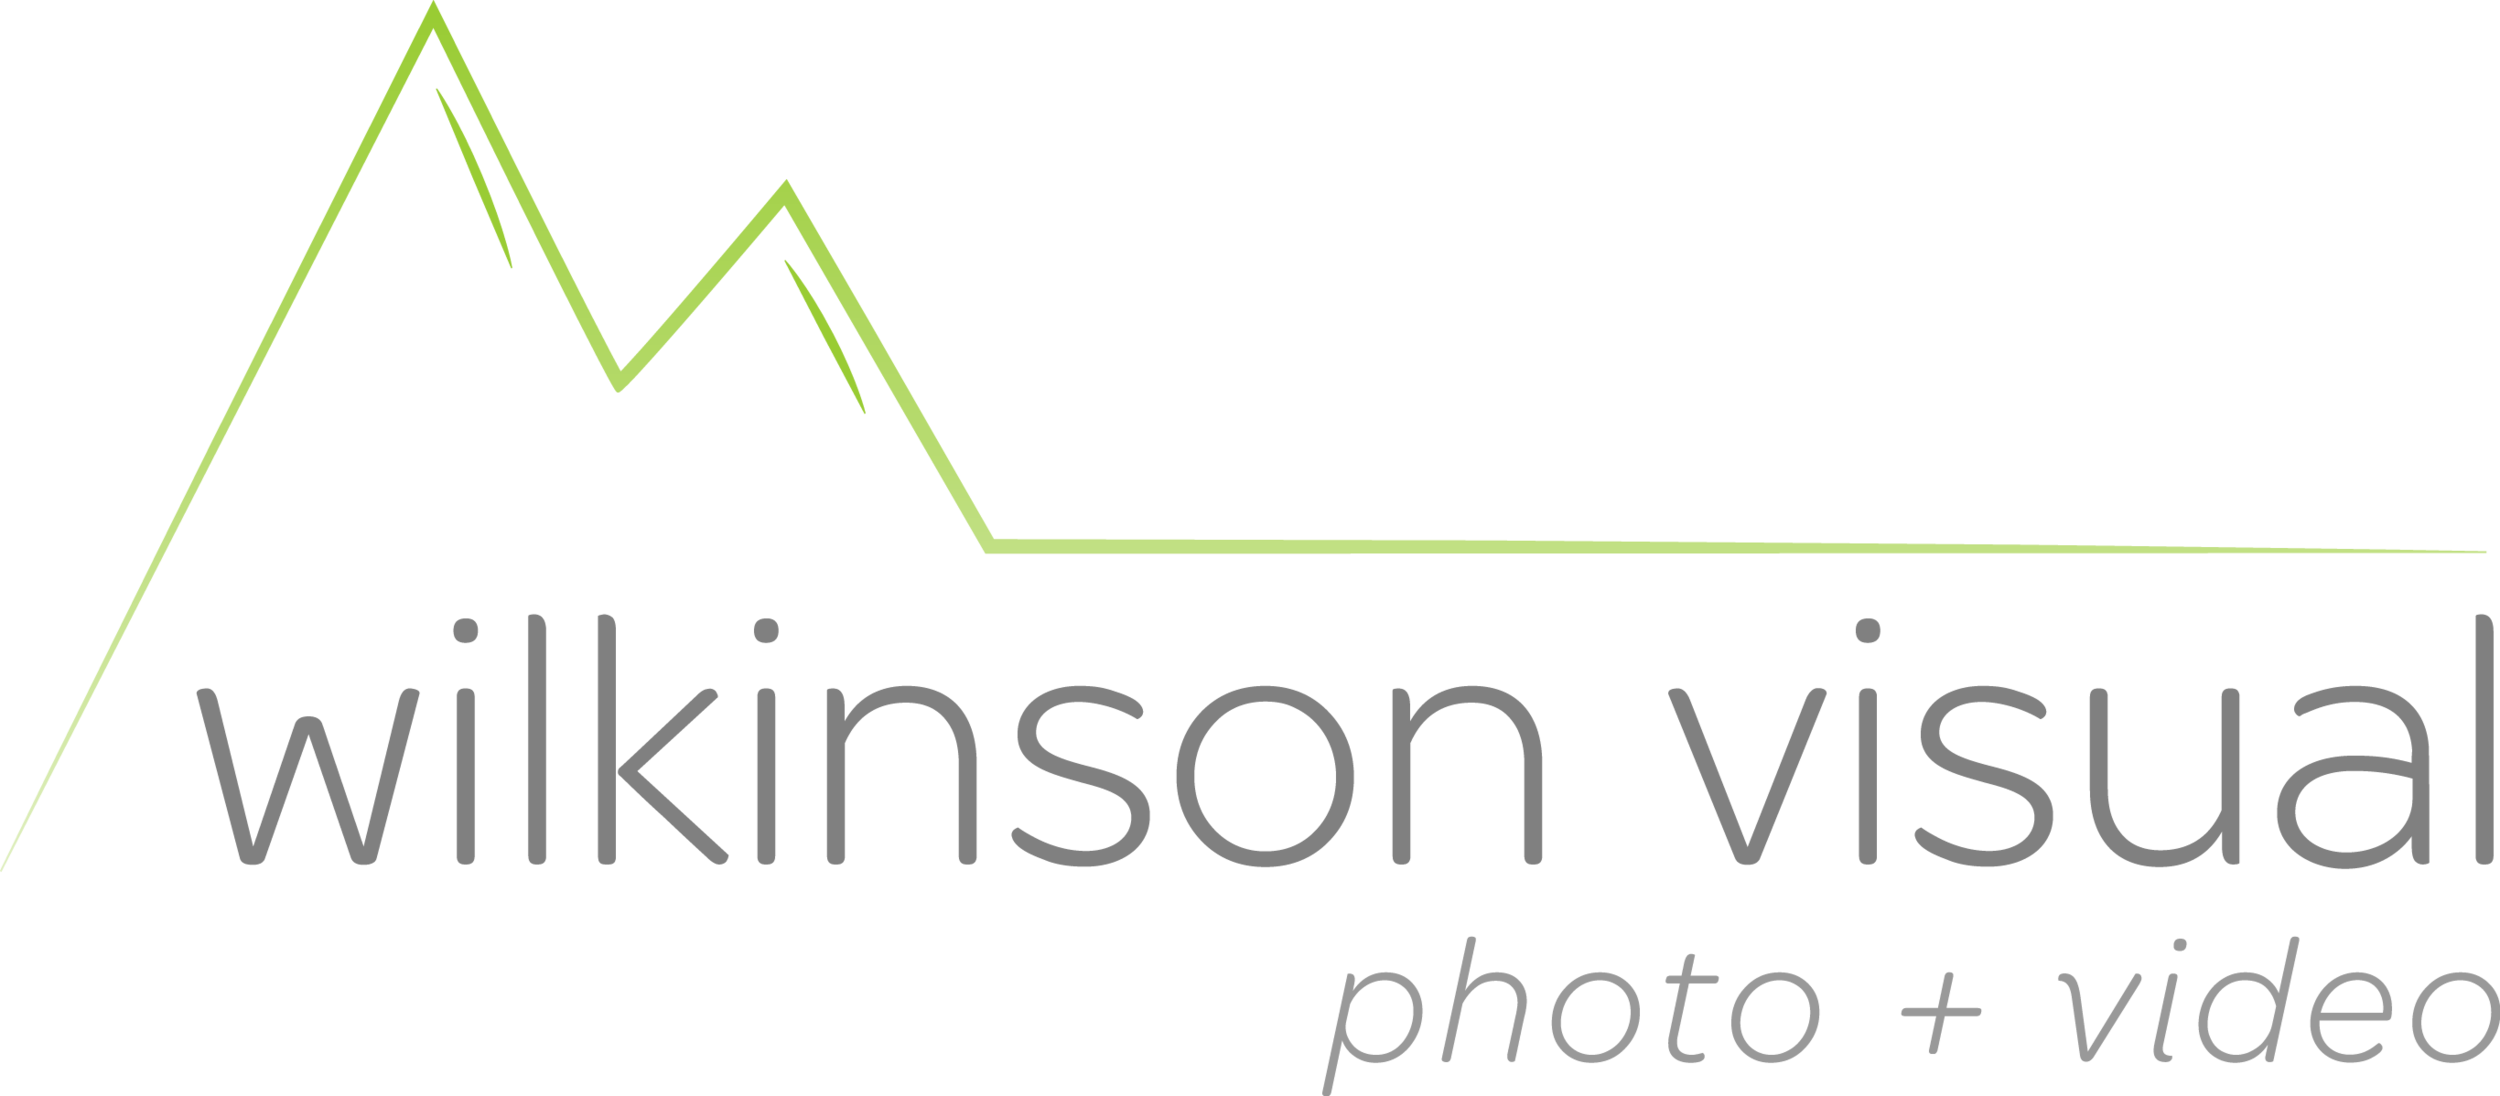 Wilkinson Visual Photography and Video in Lexington, KY